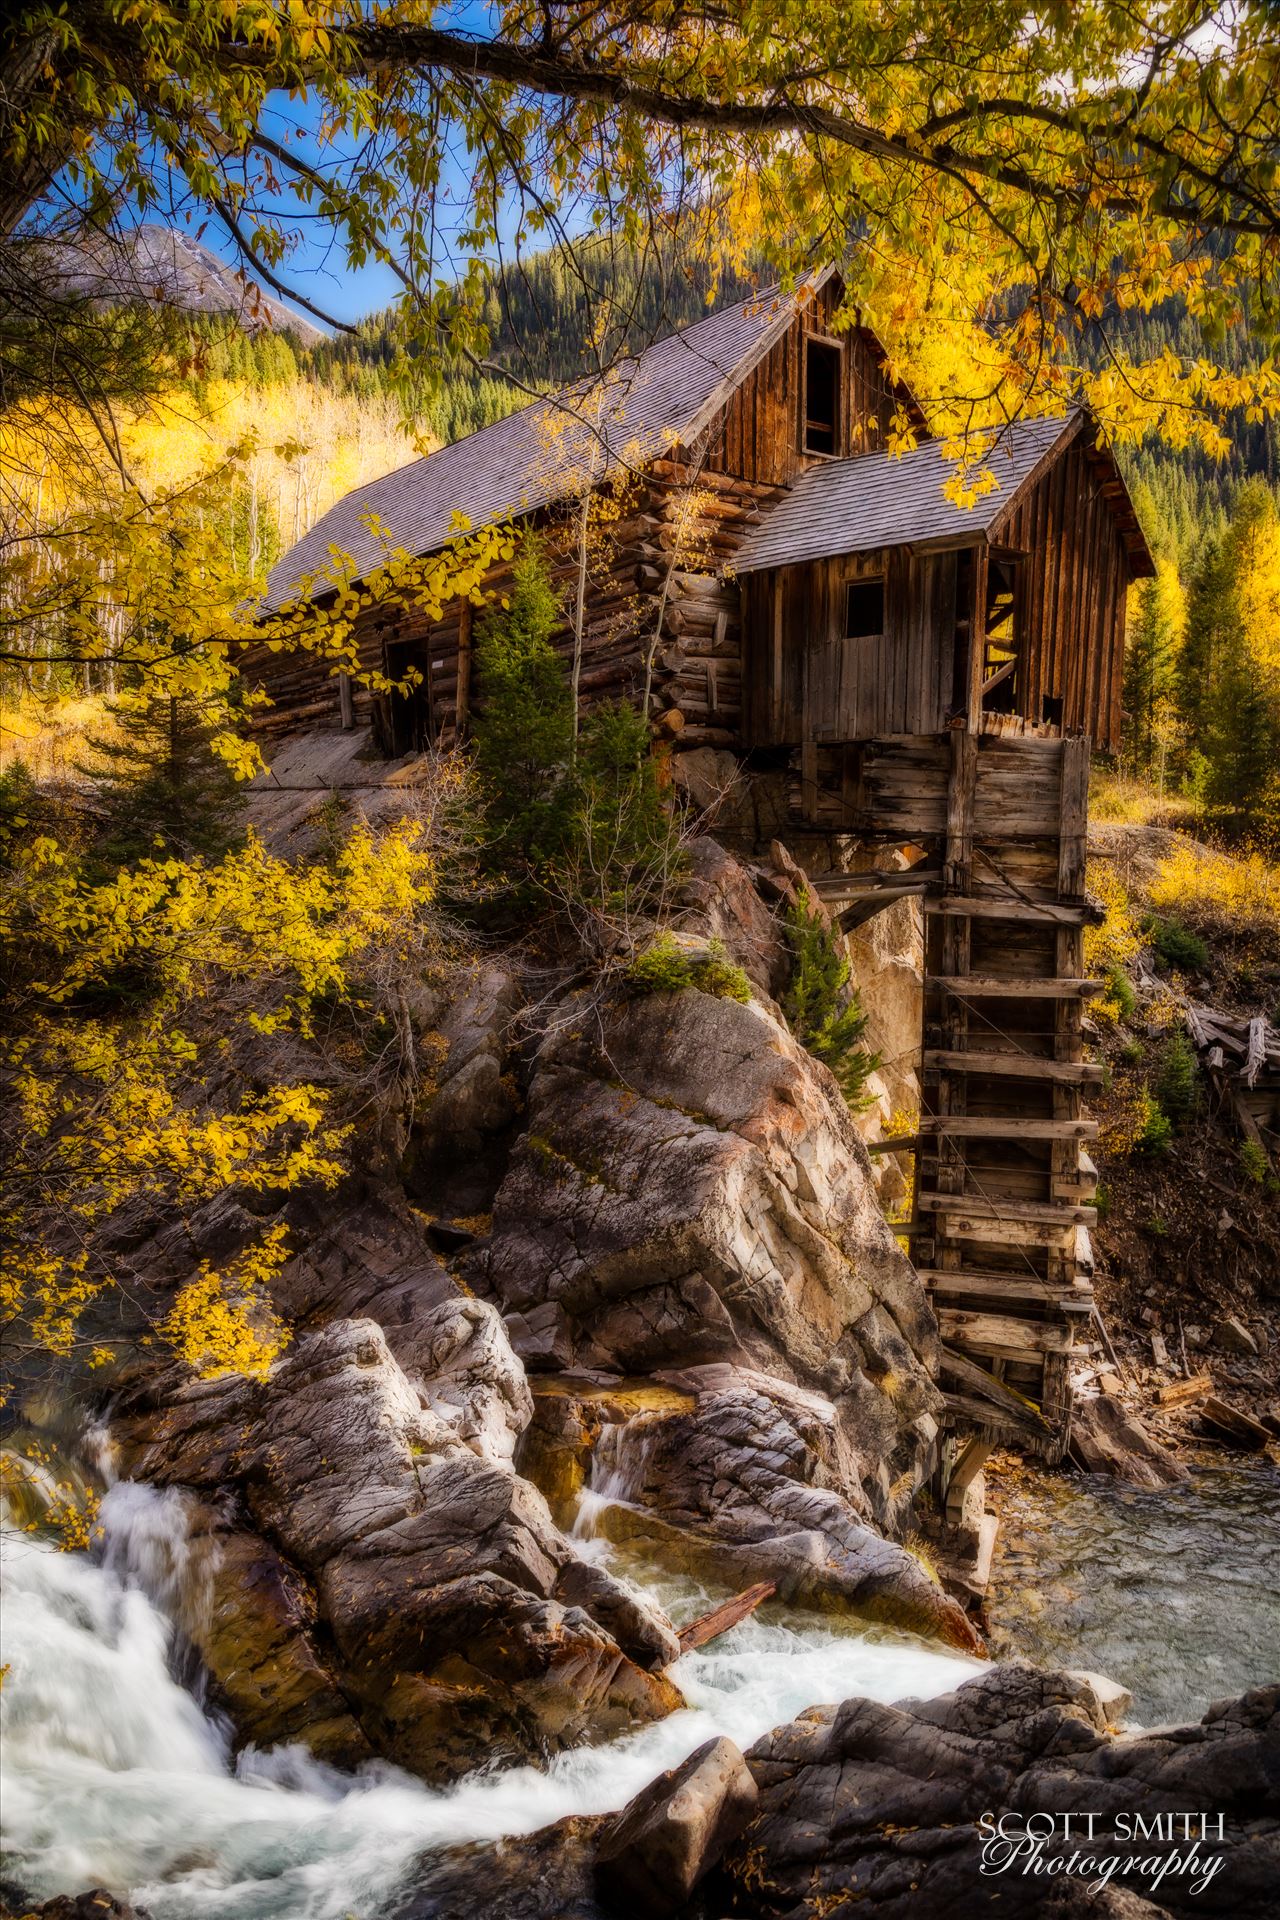 Crystal Mill, Colorado 12 - The Crystal Mill, or the Old Mill is an 1892 wooden powerhouse located on an outcrop above the Crystal River in Crystal, Colorado by Scott Smith Photos